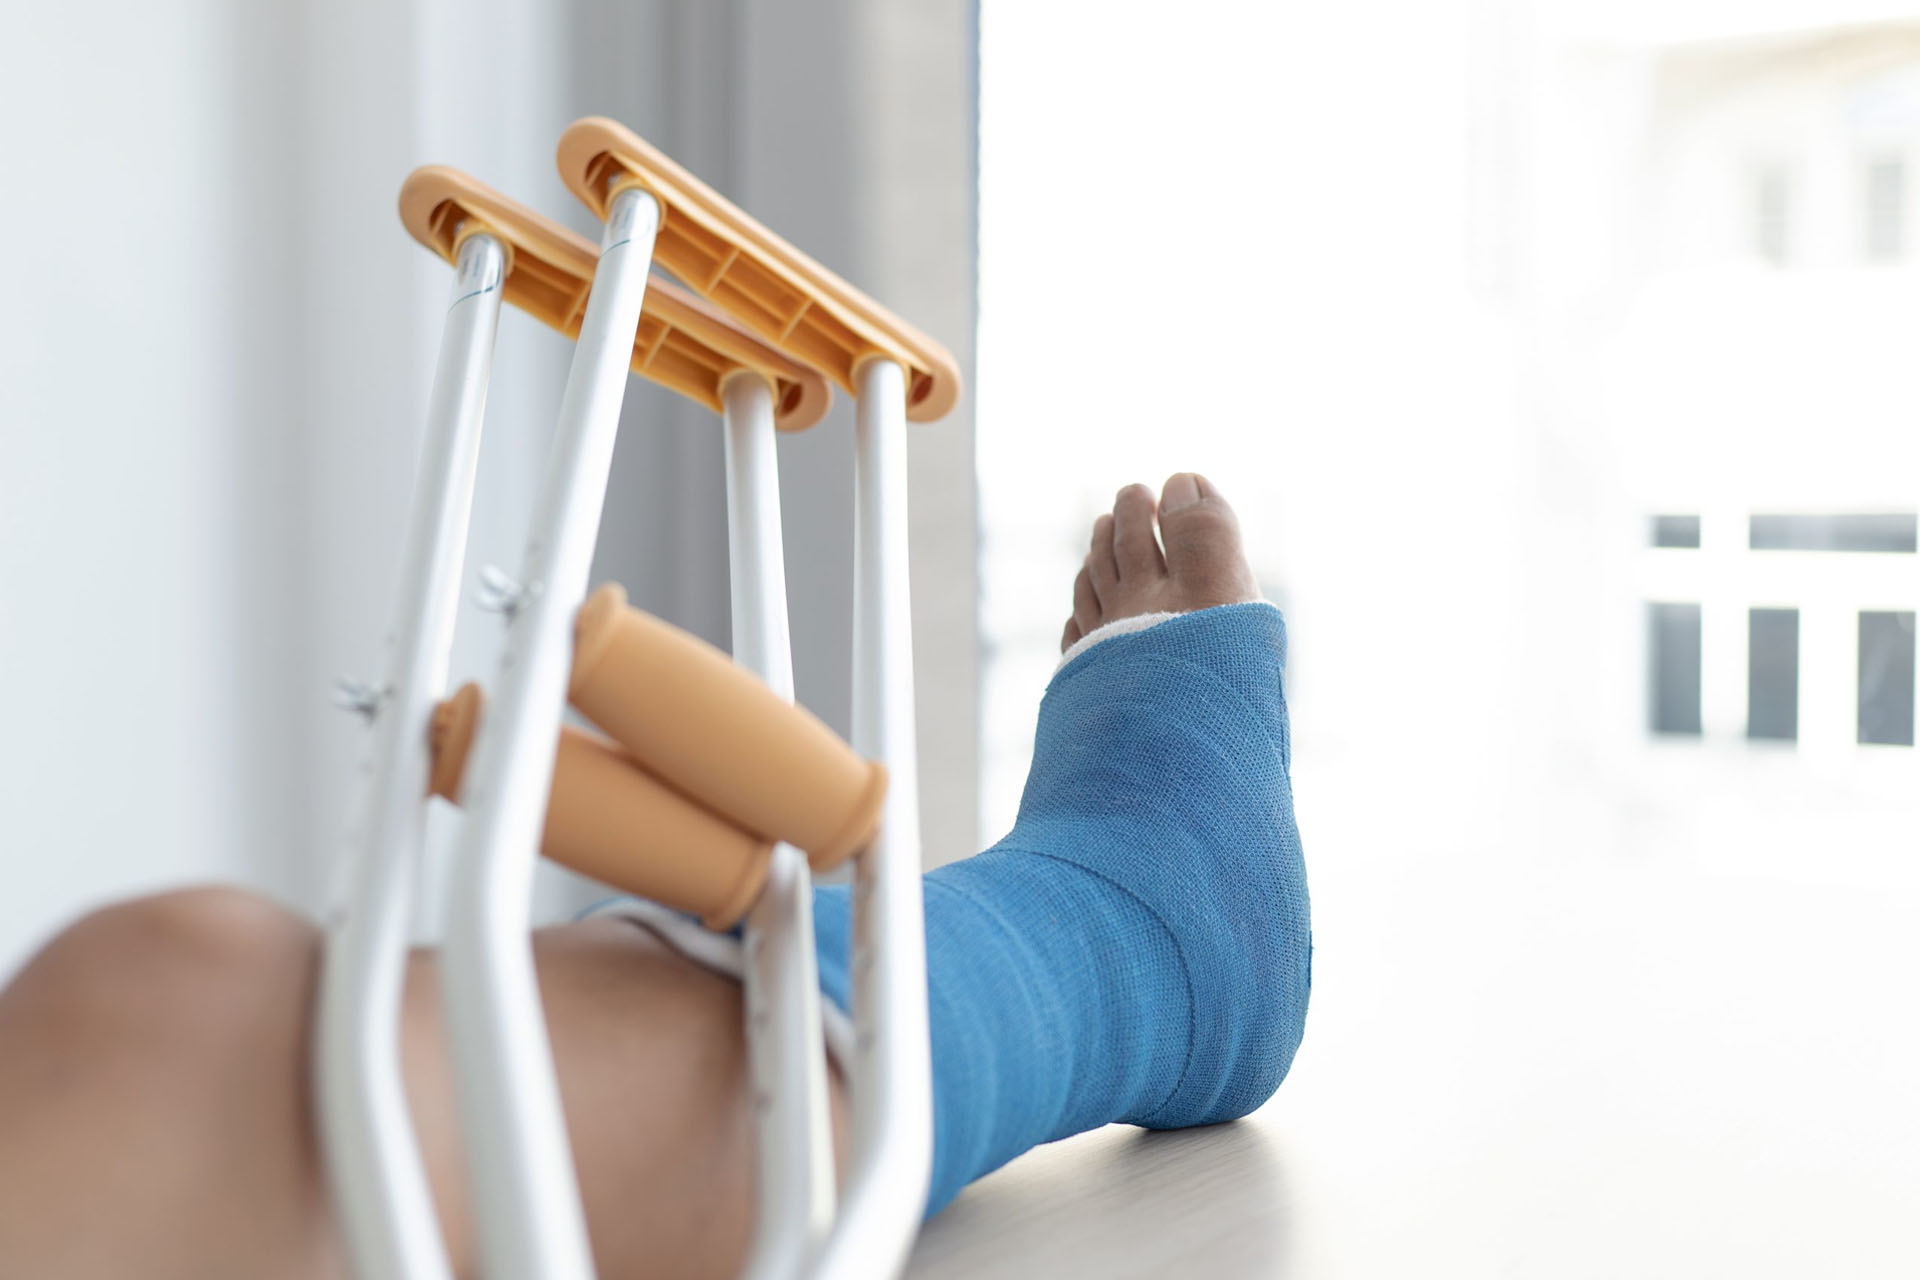 Leg injury due to slip and fall accident